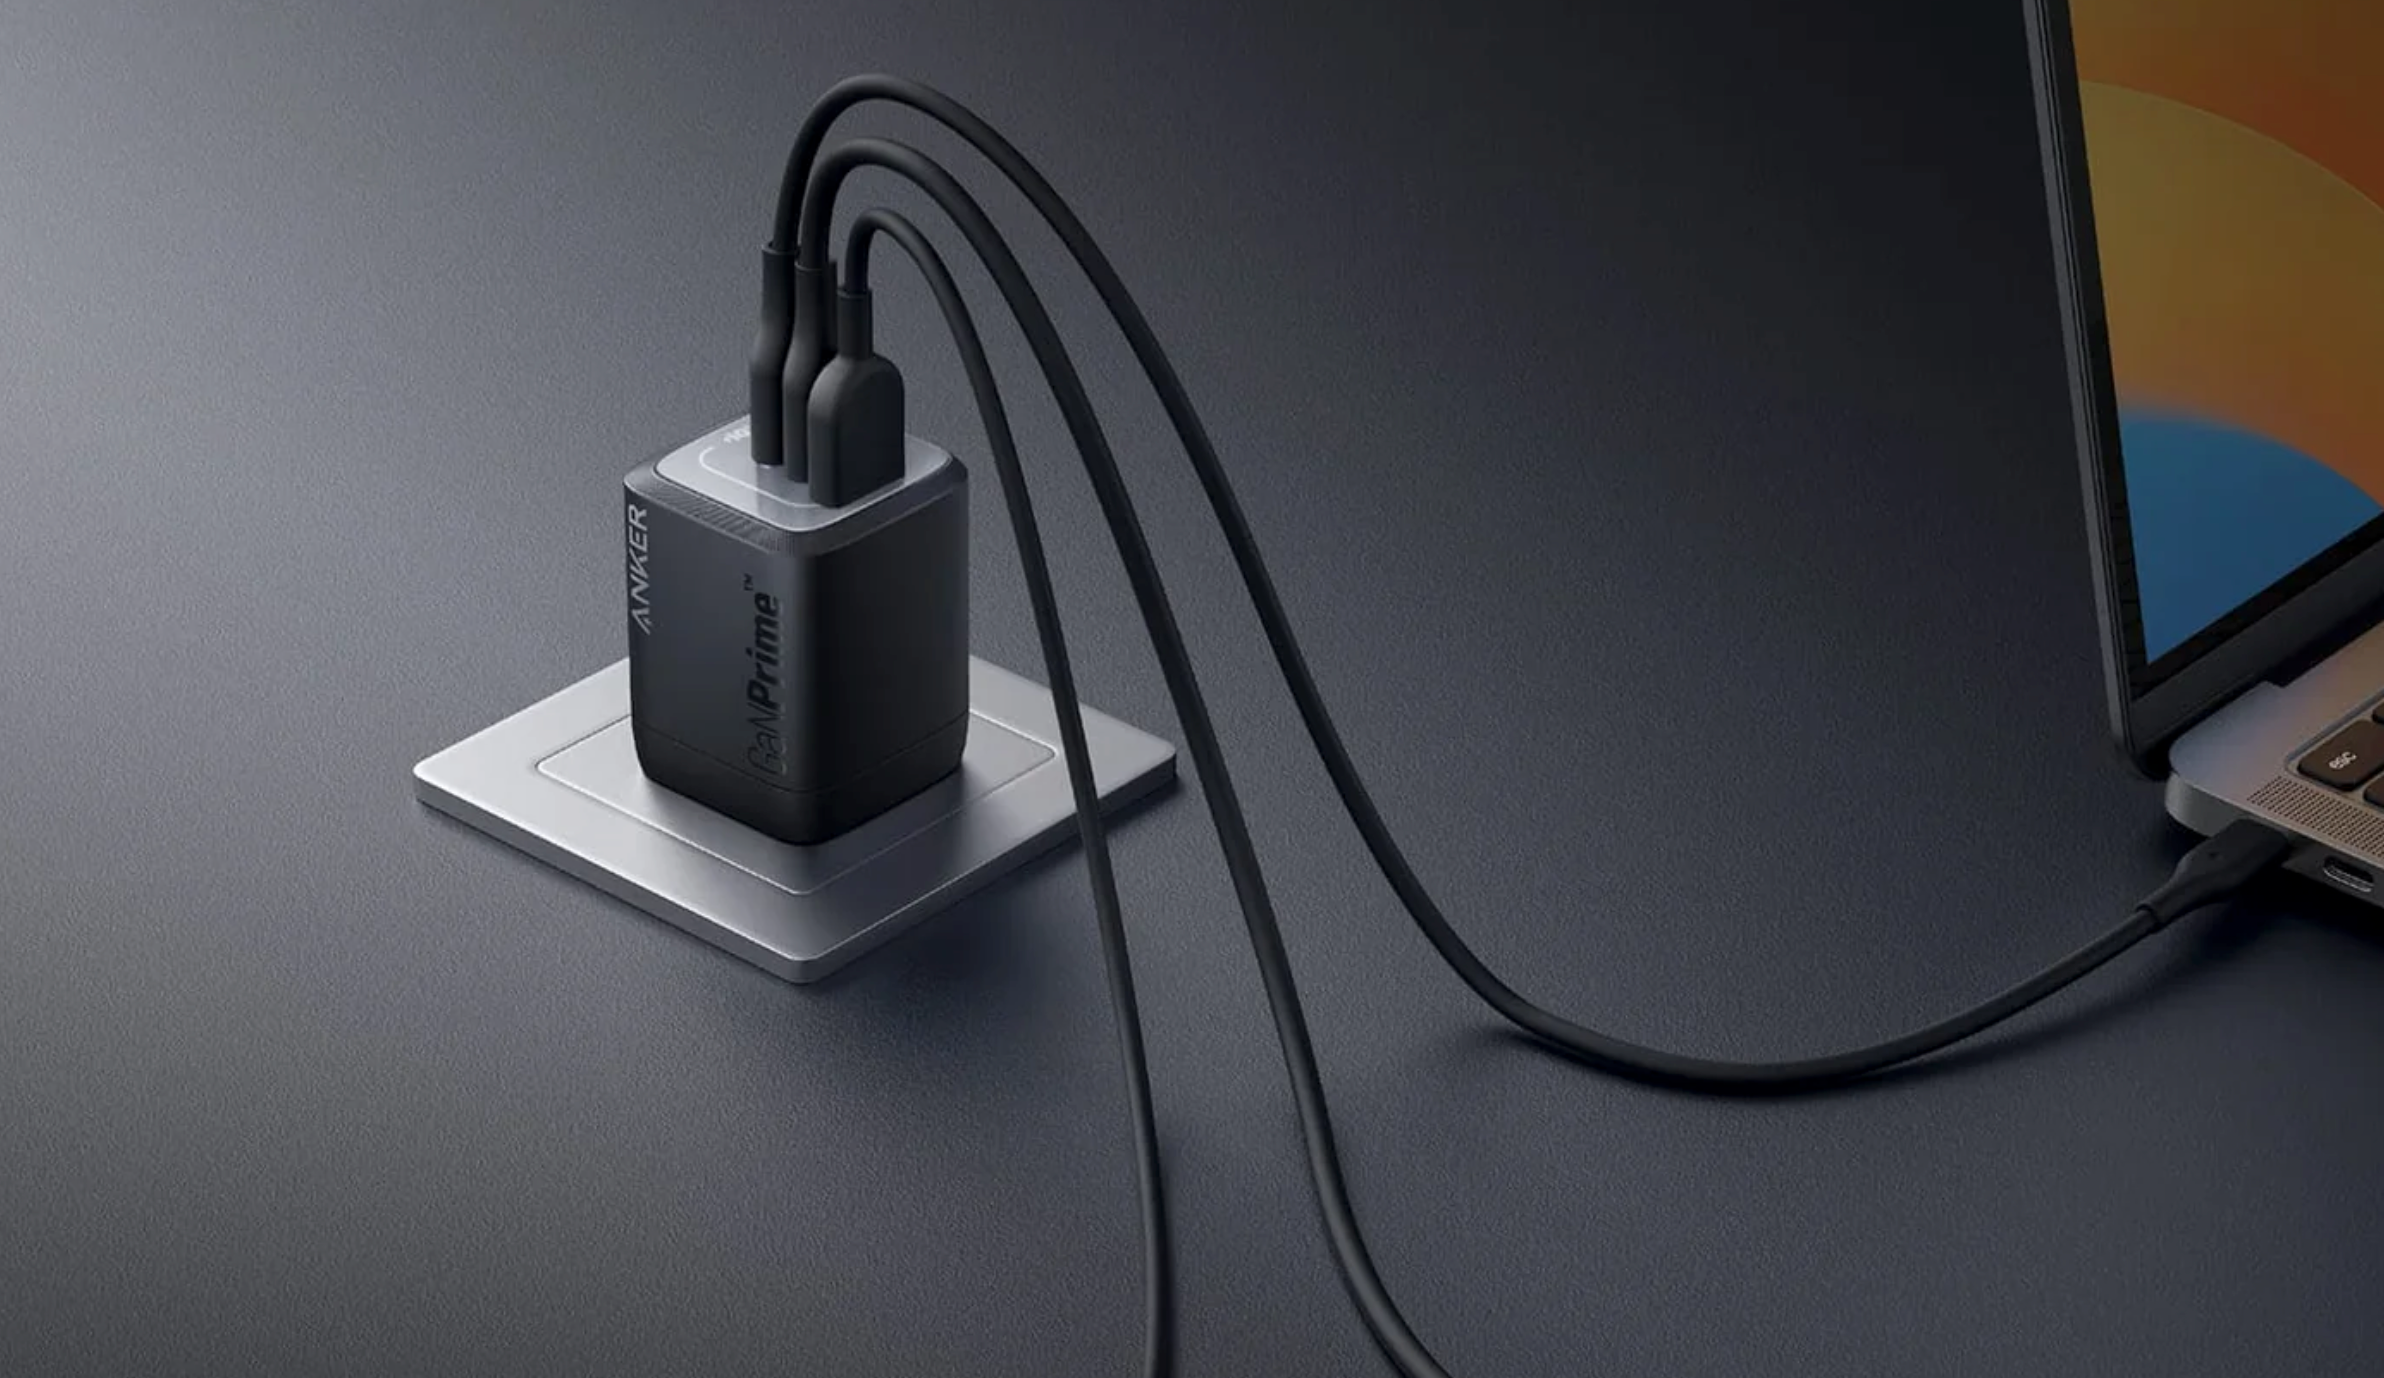 Anker USB-C charger plugged into an outlet on a gray des